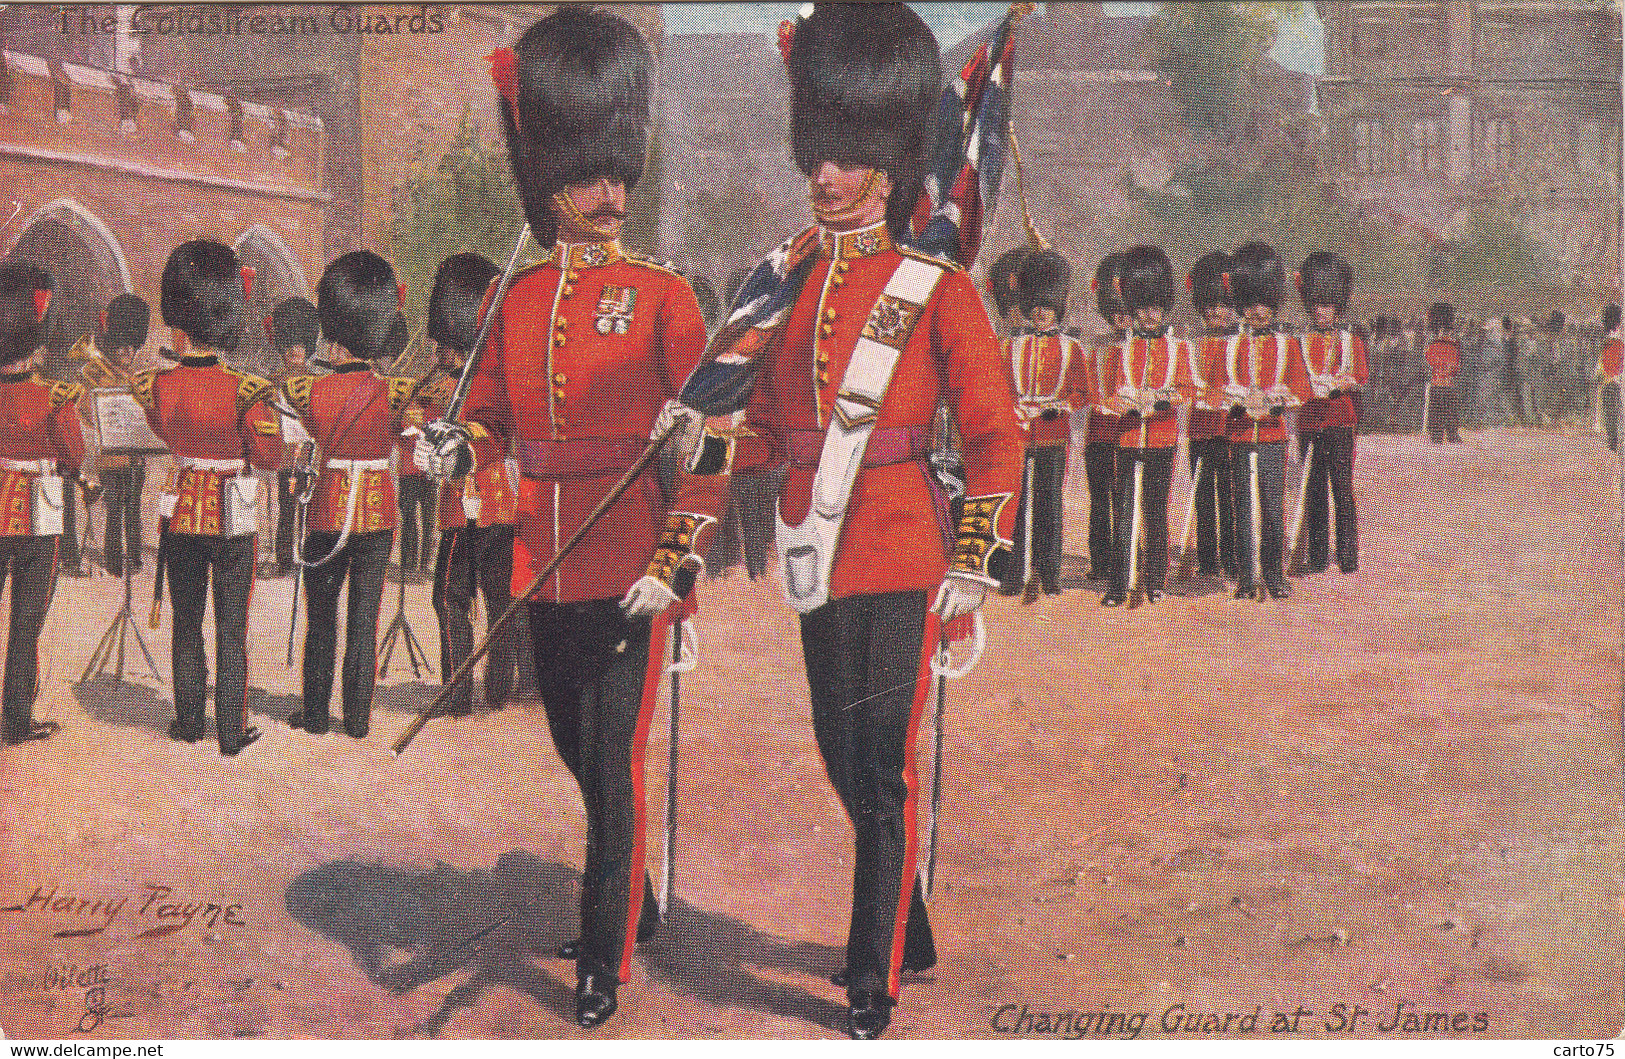 Illustrateurs - Tuck Harry Payne - Militaria - The British Army - Changing Guards At St James - Regiment Of Foot Guards - Tuck, Raphael